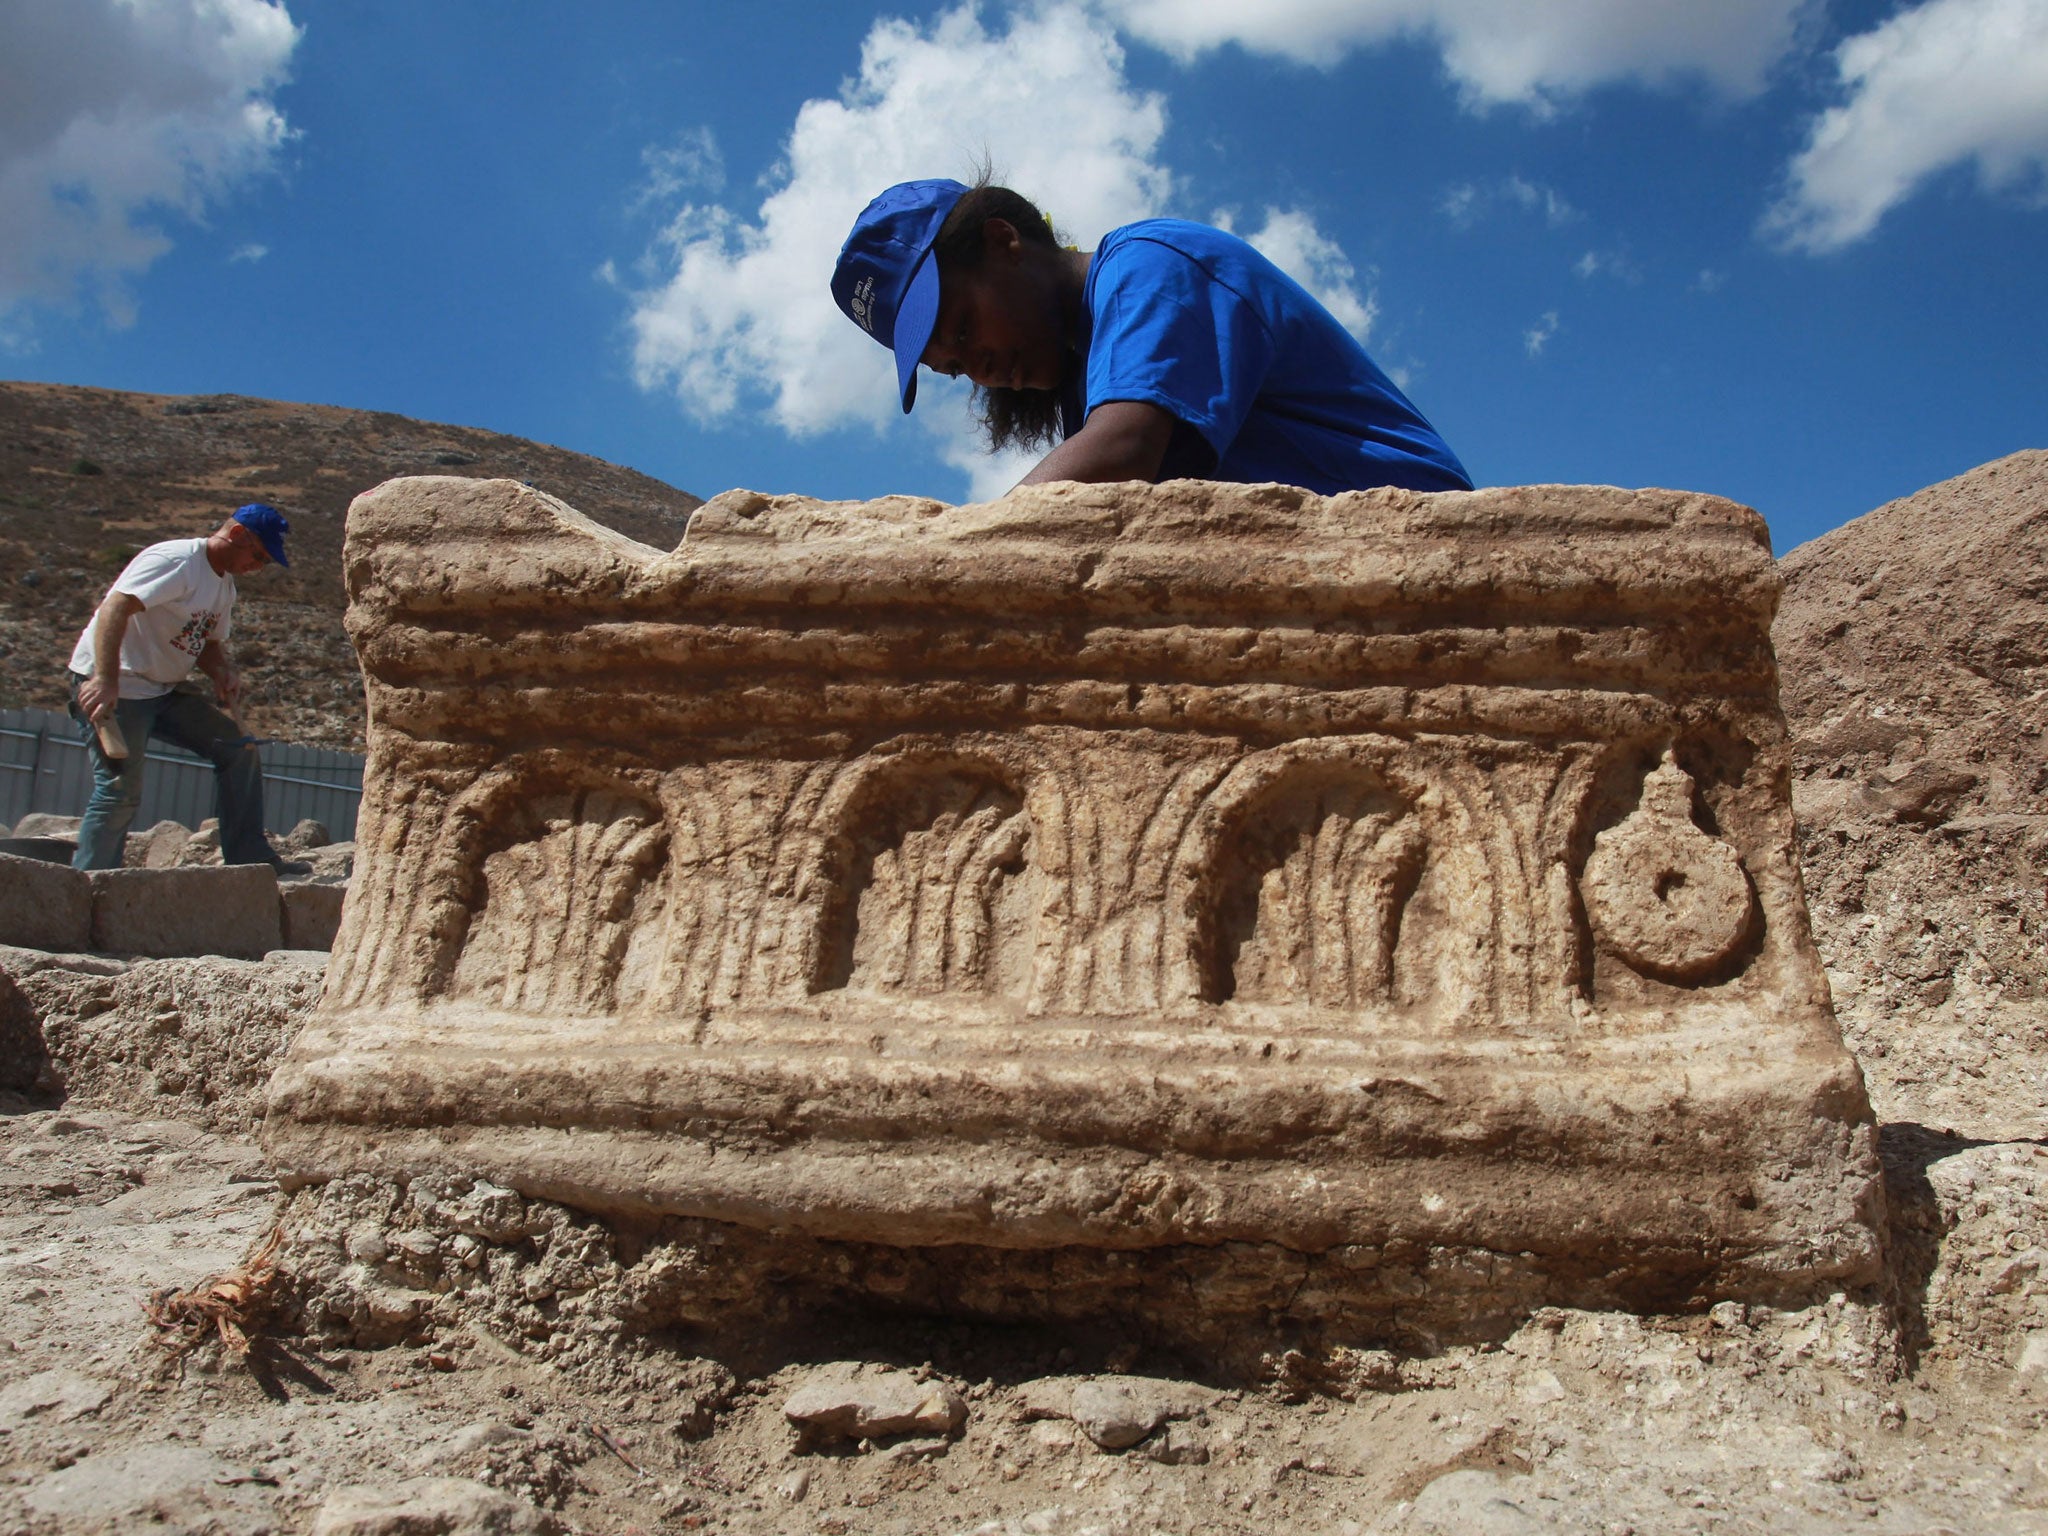 An Israeli Antiquities Authority worker cleans a large carved stone found during excavations of a recently uncovered synagogue on September 13, 2009 at Migdal on the north-western end of the Sea of Galilee in northern Israel.